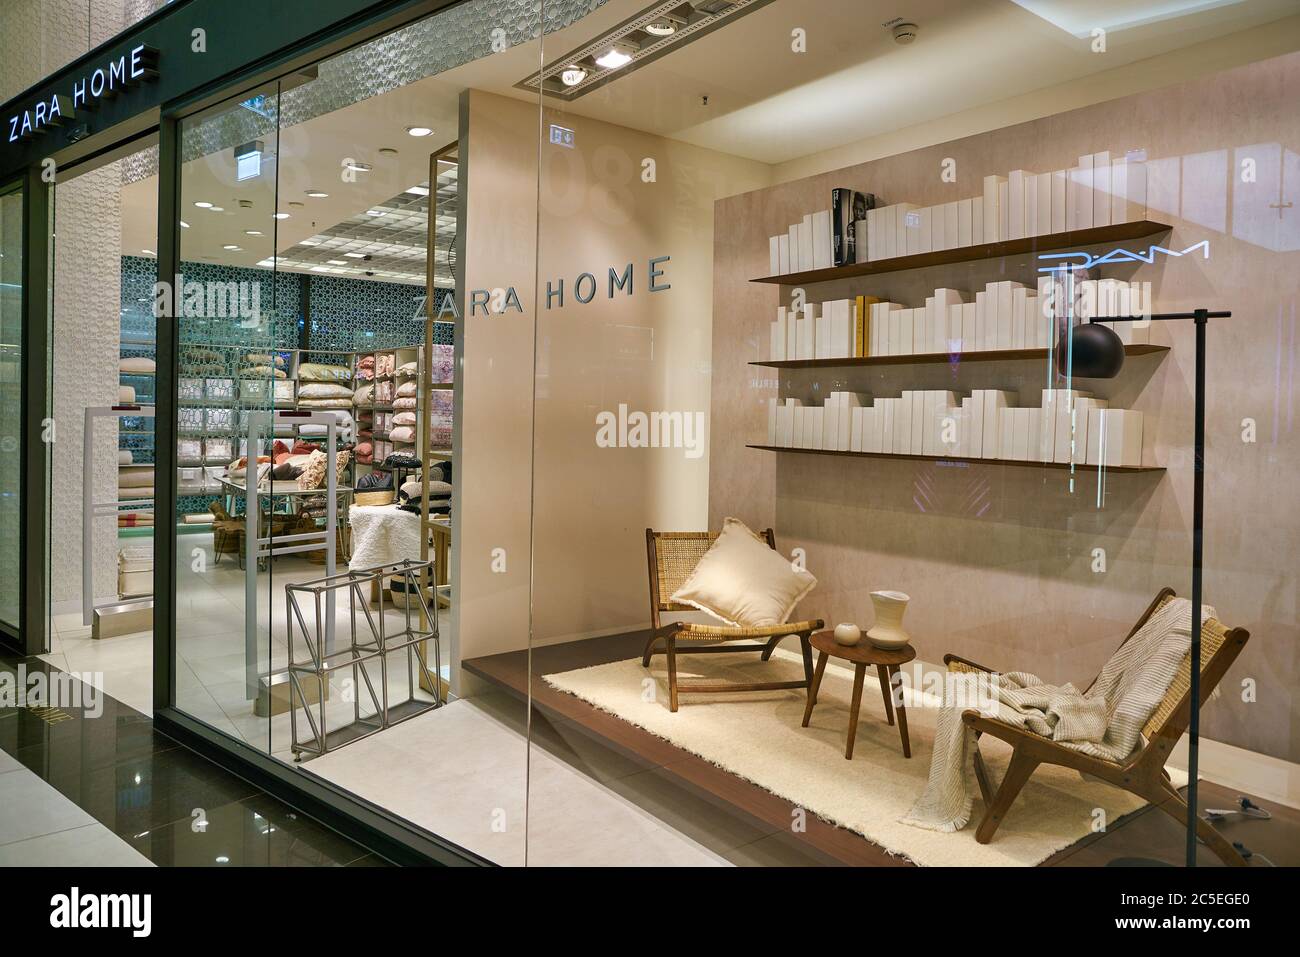 Zara storefront hi-res stock photography and images - Alamy